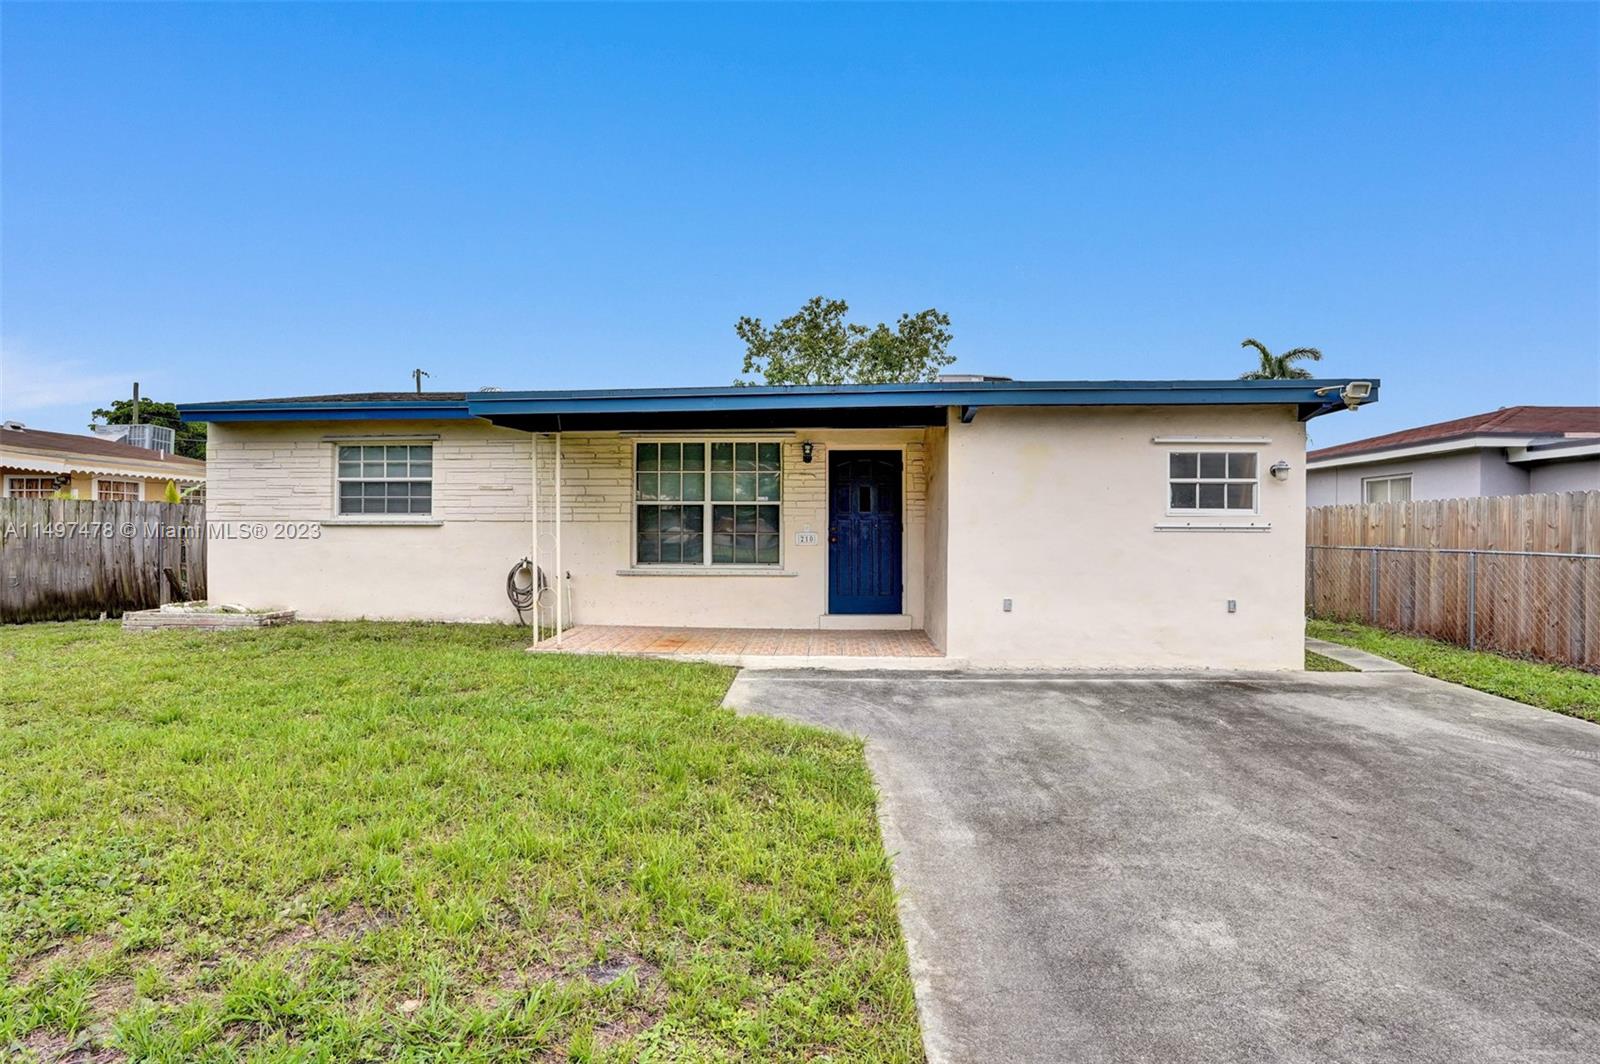 210 N 72nd Ave, Hollywood, Florida 33024, 3 Bedrooms Bedrooms, ,2 BathroomsBathrooms,Residential,For Sale,210 N 72nd Ave,A11497478